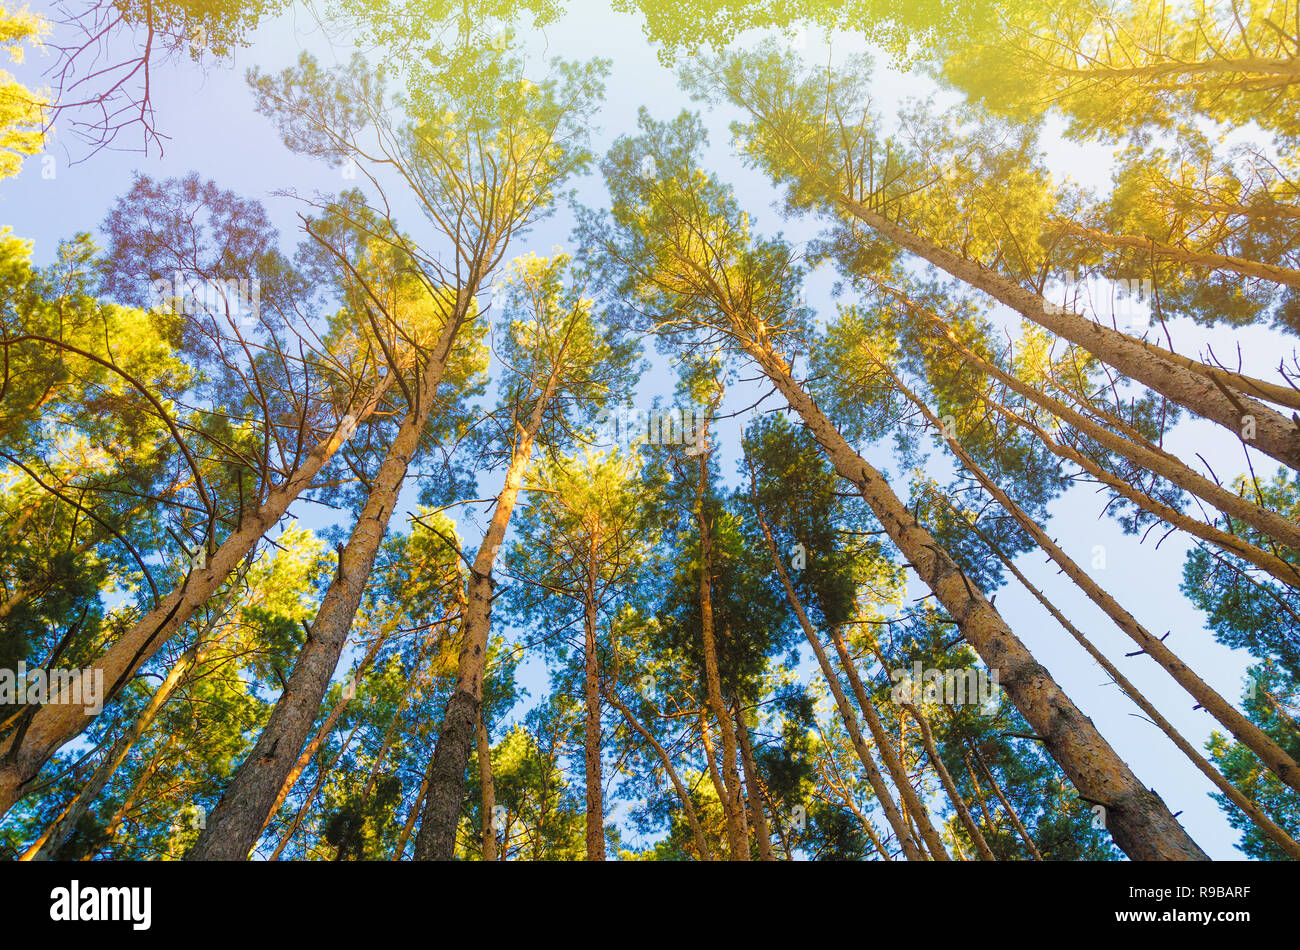 pine trees in forest view from below Stock Photo